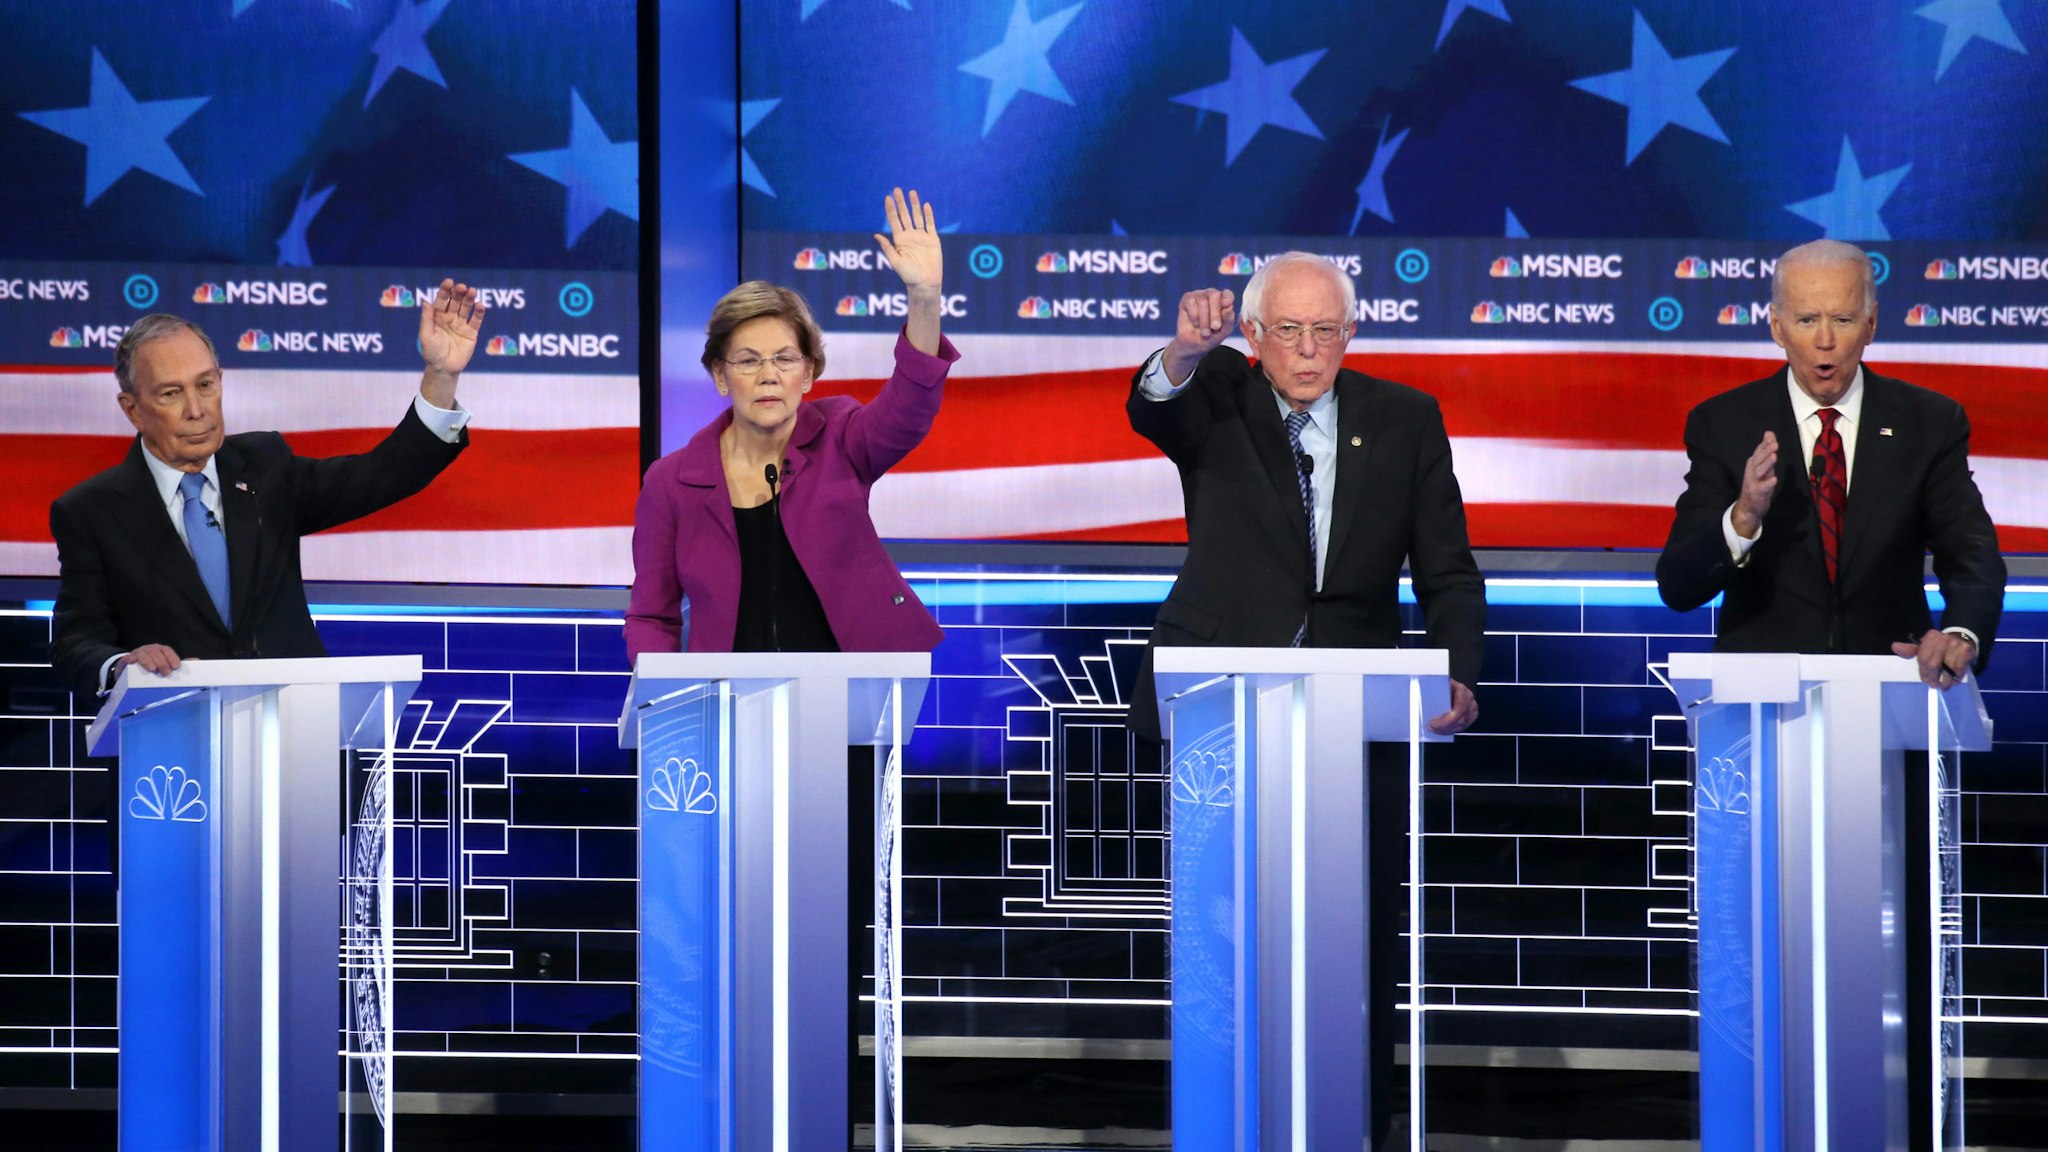 LAS VEGAS, NEVADA - FEBRUARY 19: Democratic presidential candidates (L-R) former New York City mayor Mike Bloomberg, Sen. Elizabeth Warren (D-MA) and Sen. Bernie Sanders (I-VT) raise their hands as former Vice President Joe Biden (R) speaks during the Democratic presidential primary debate at Paris Las Vegas on February 19, 2020 in Las Vegas, Nevada. Six candidates qualified for the third Democratic presidential primary debate of 2020, which comes just days before the Nevada caucuses on February 22.